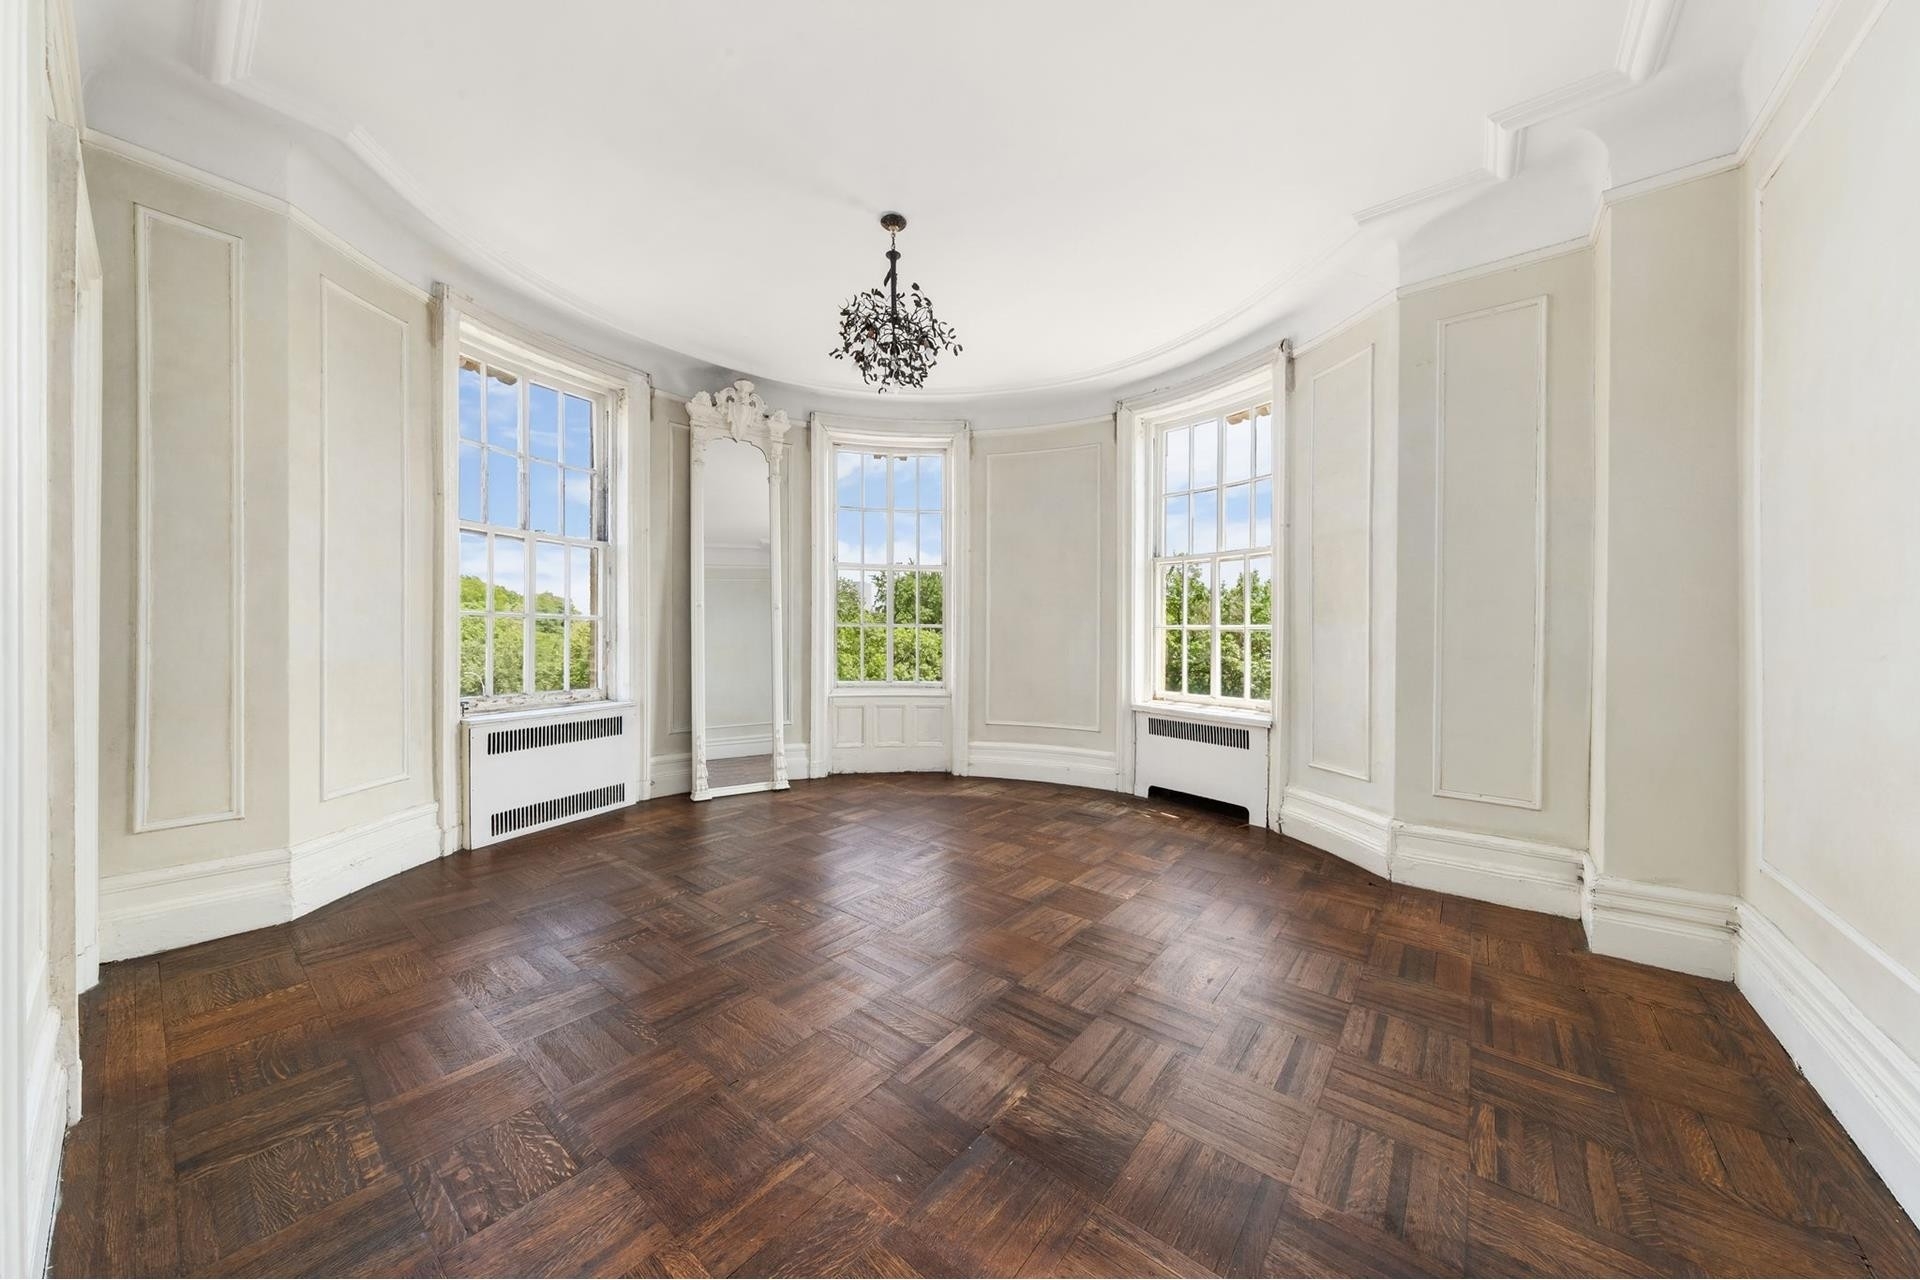 5. Co-op Properties for Sale at The St. Urban, 285 CENTRAL PARK W, 5N Upper West Side, New York, NY 10024